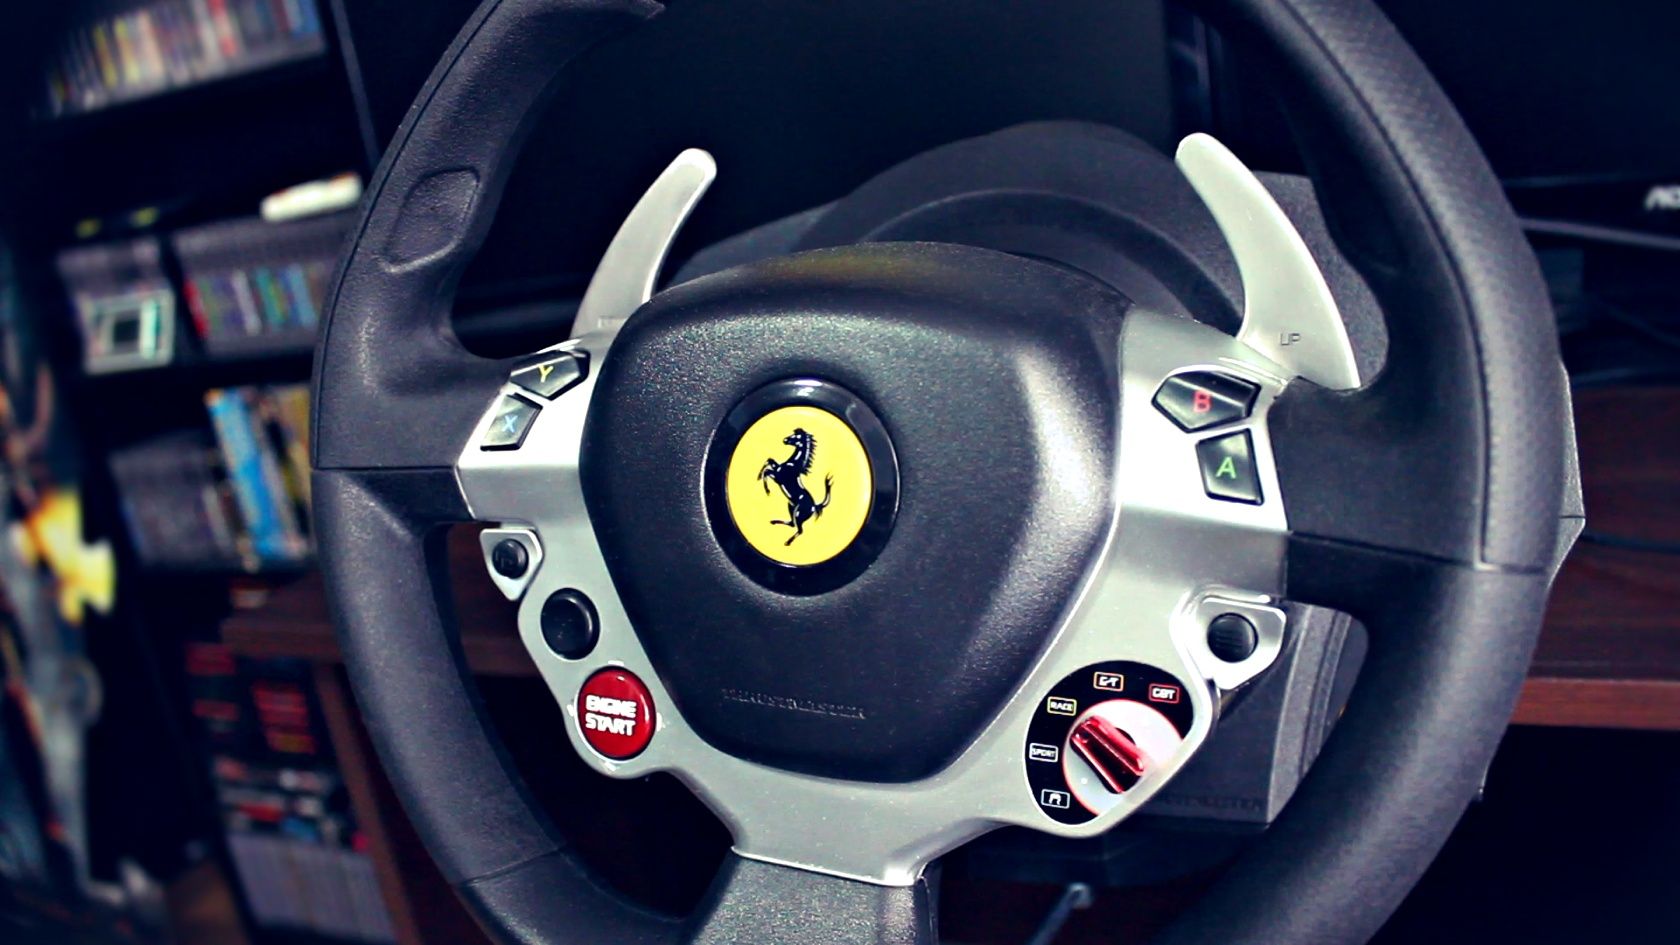 Thrustmaster Tx Racing Wheel Ferrari 458 Italia Edition Review And Giveaway